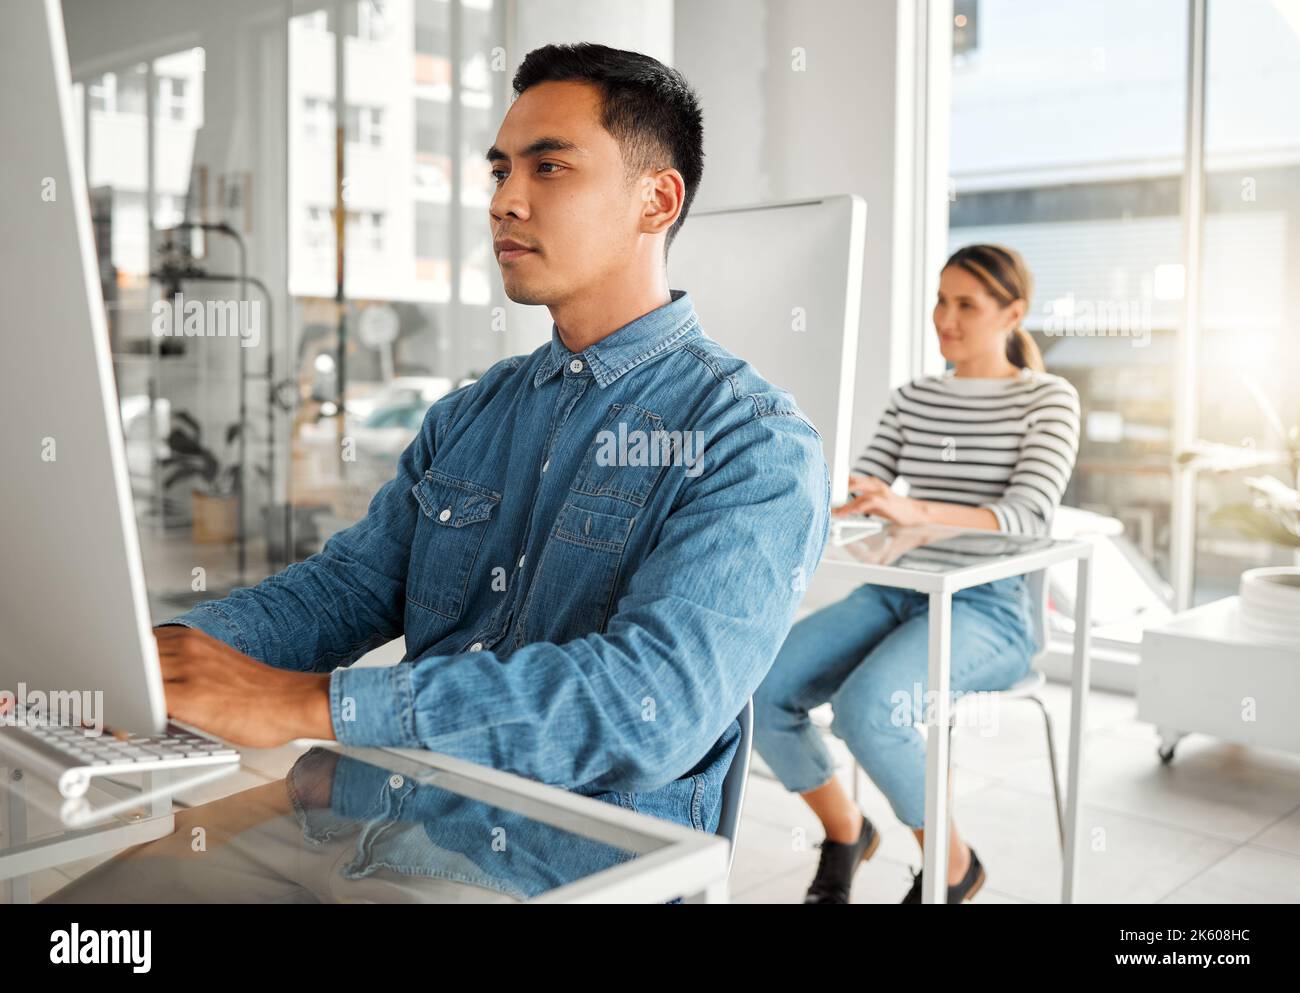 Young focused asian businessman using a desktop computer in an office at work. Serious chinese male businessperson typing an email at a desk. Business Stock Photo